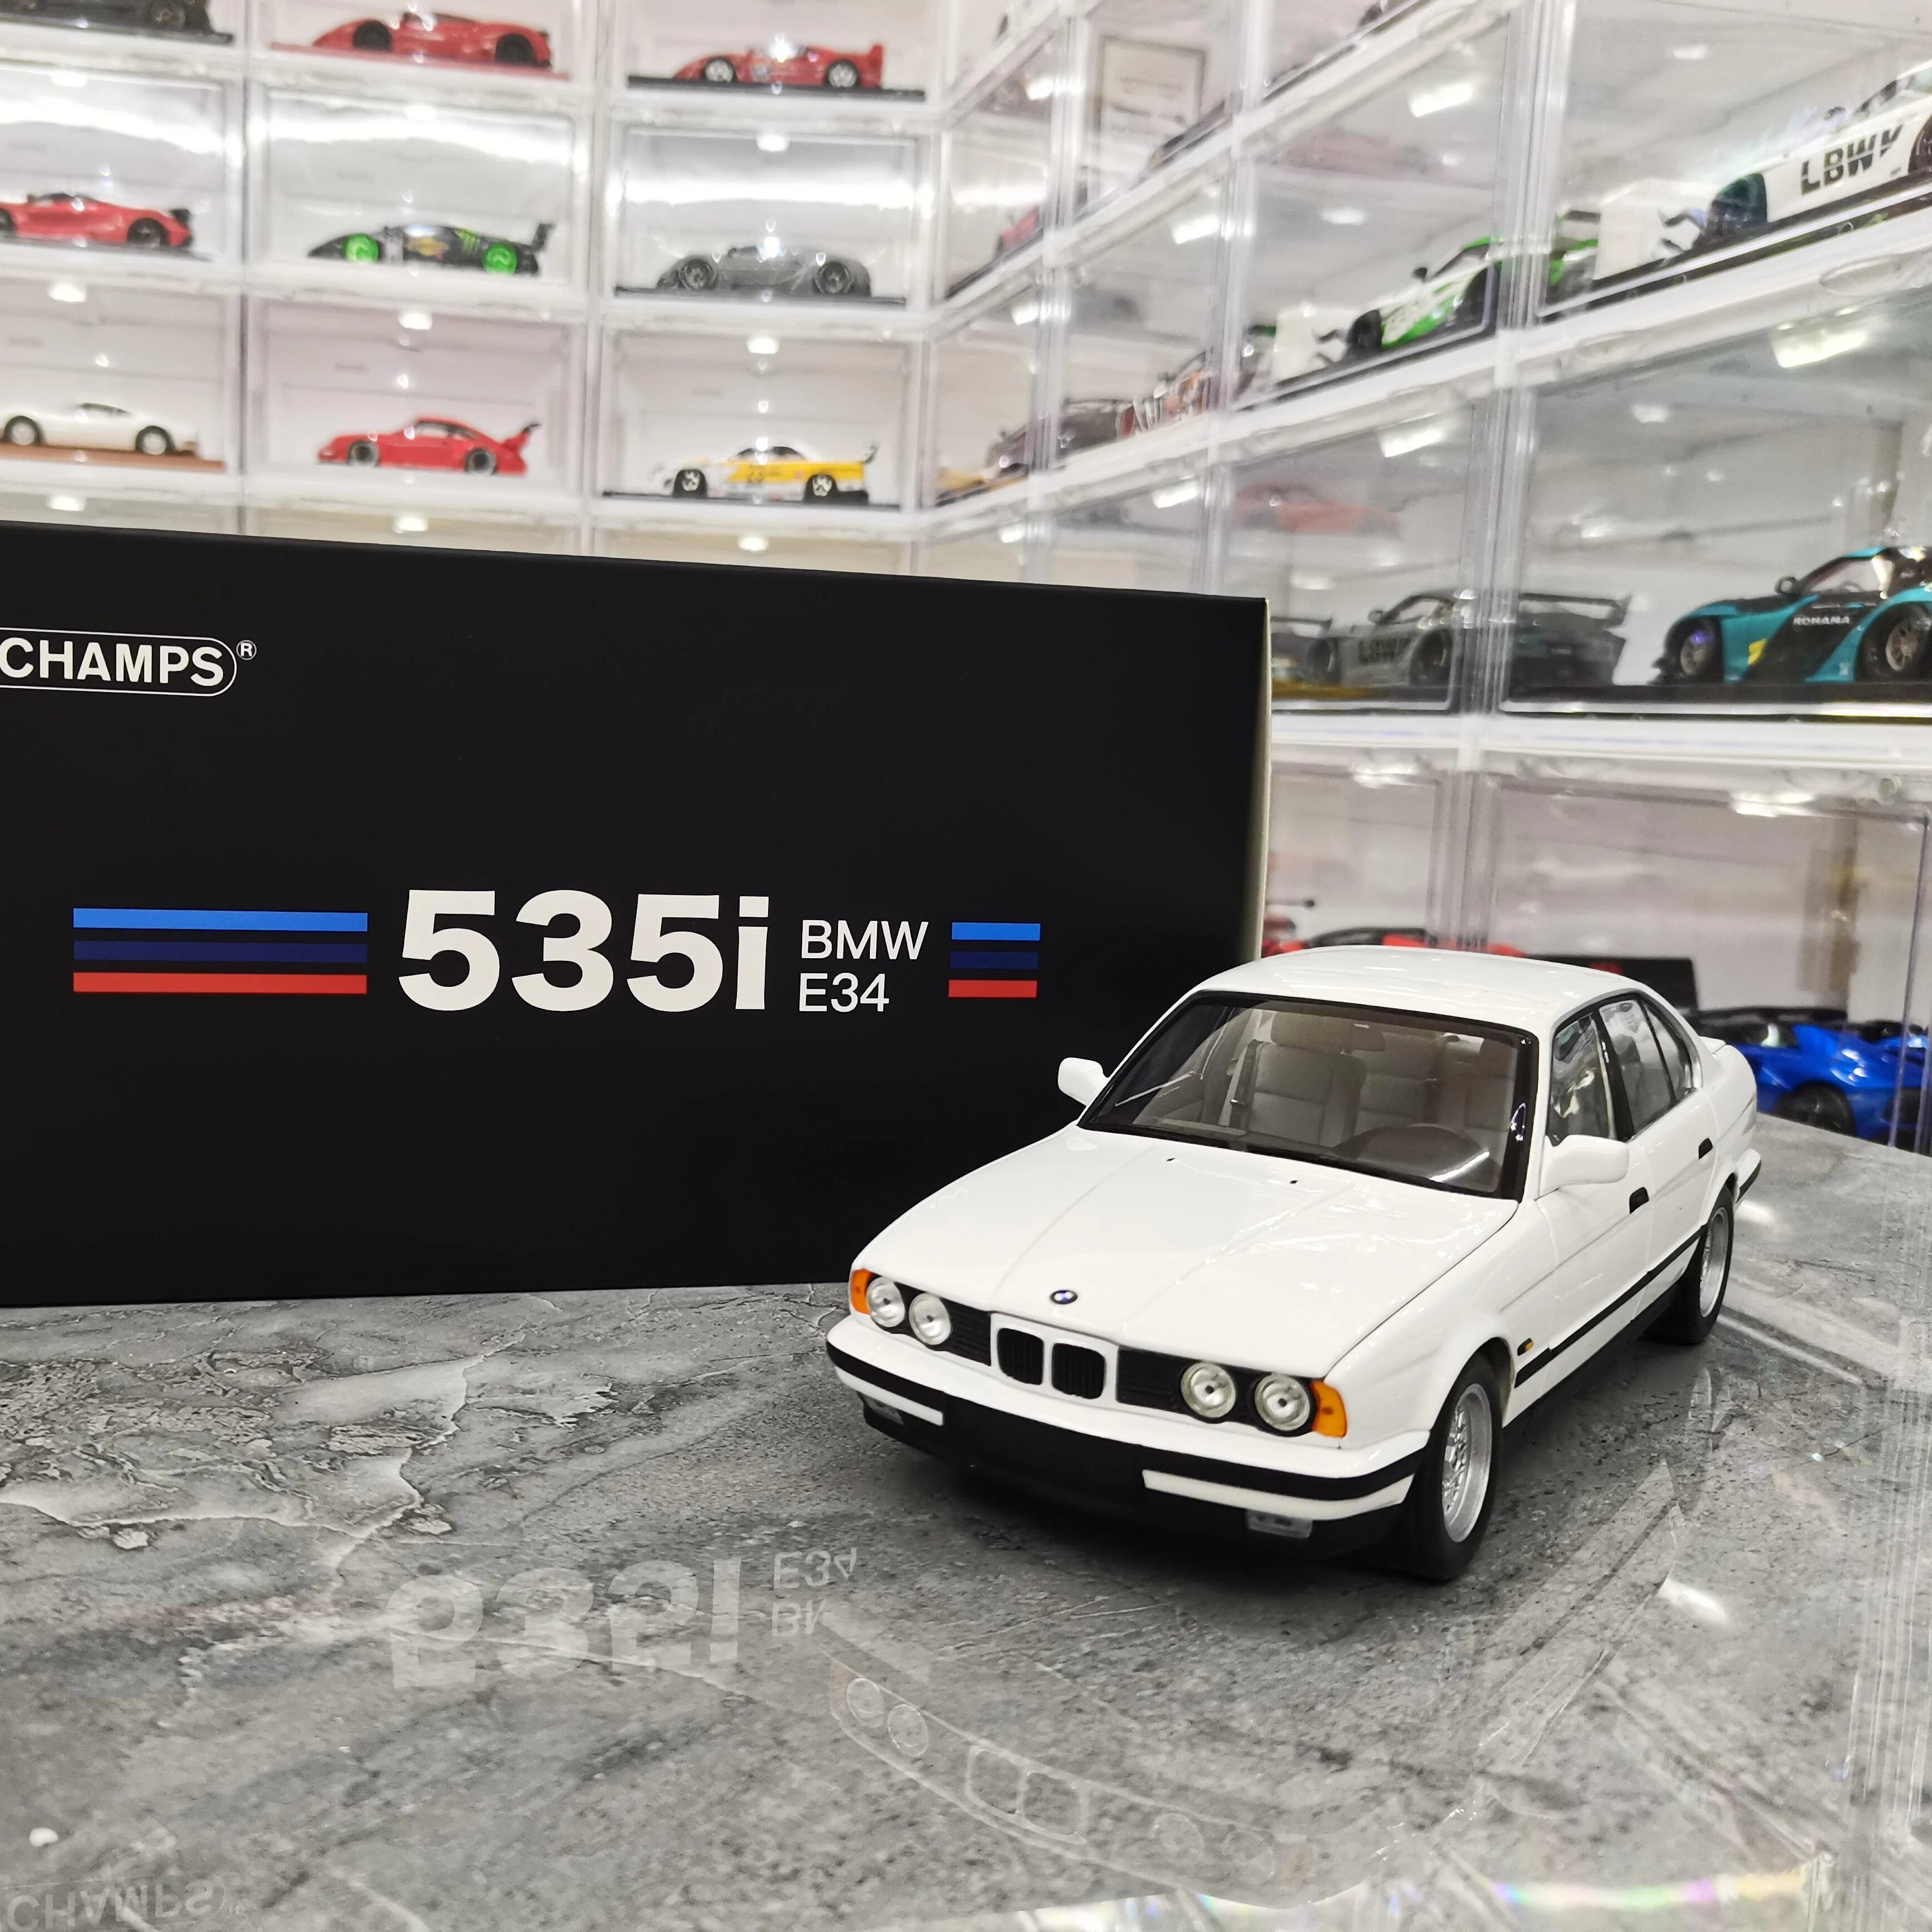 

Minichamps 1:18 BMW 535i (E34) 1988 Diecast Simulation Alloy Car Model Toy Gift Toy Vehicles